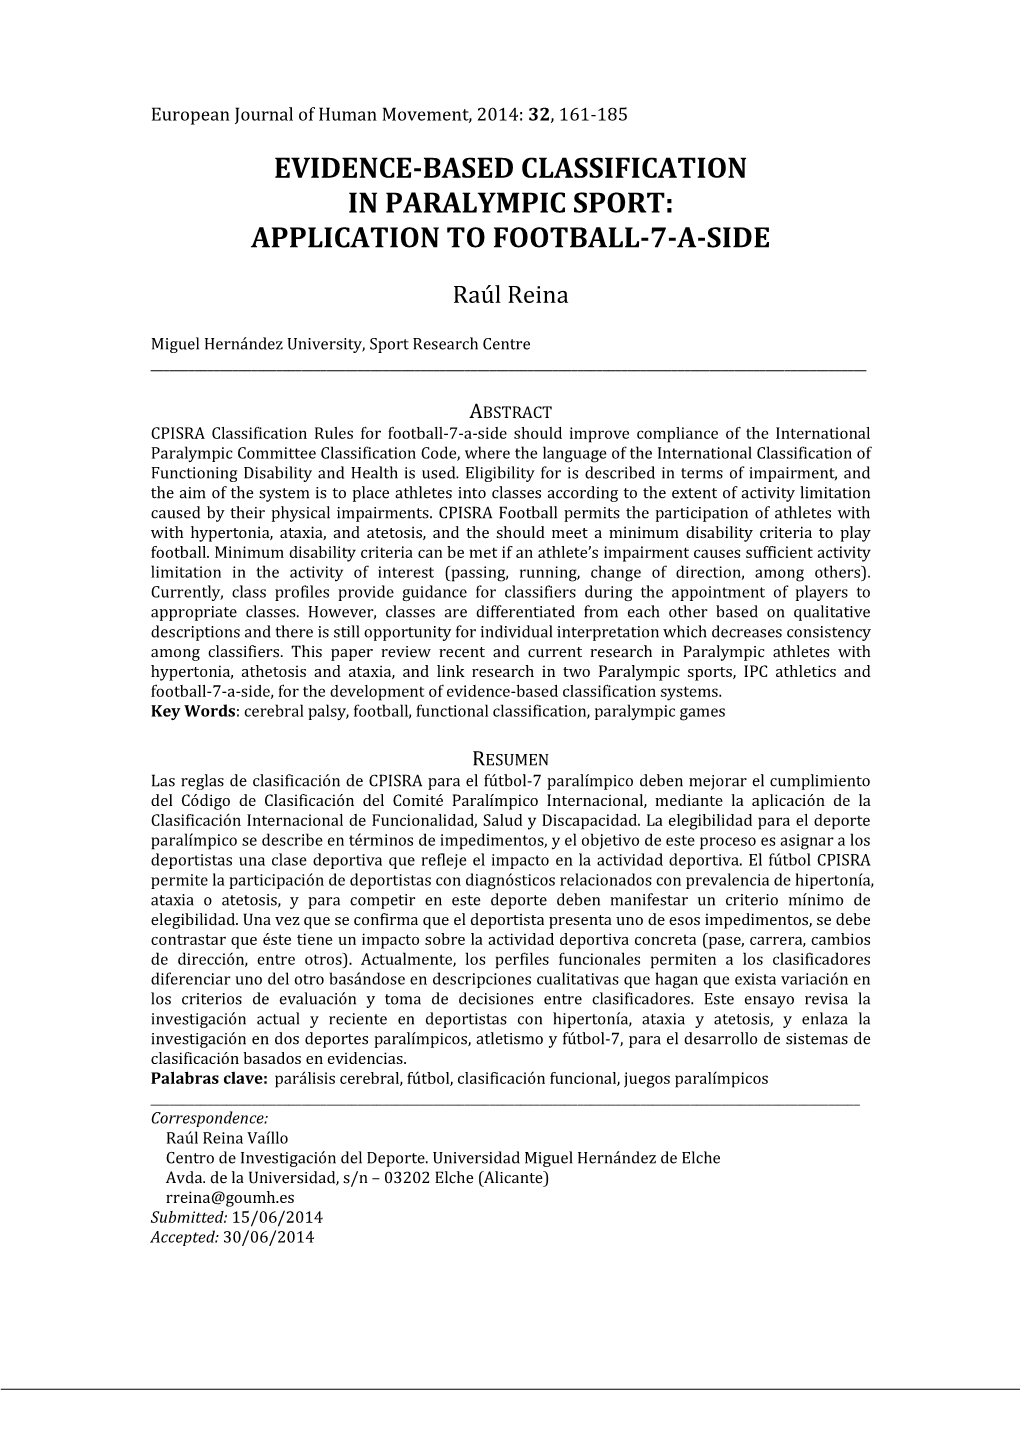 Evidence-Based Classification in Paralympic Sport: Application to Football-7-A-Side